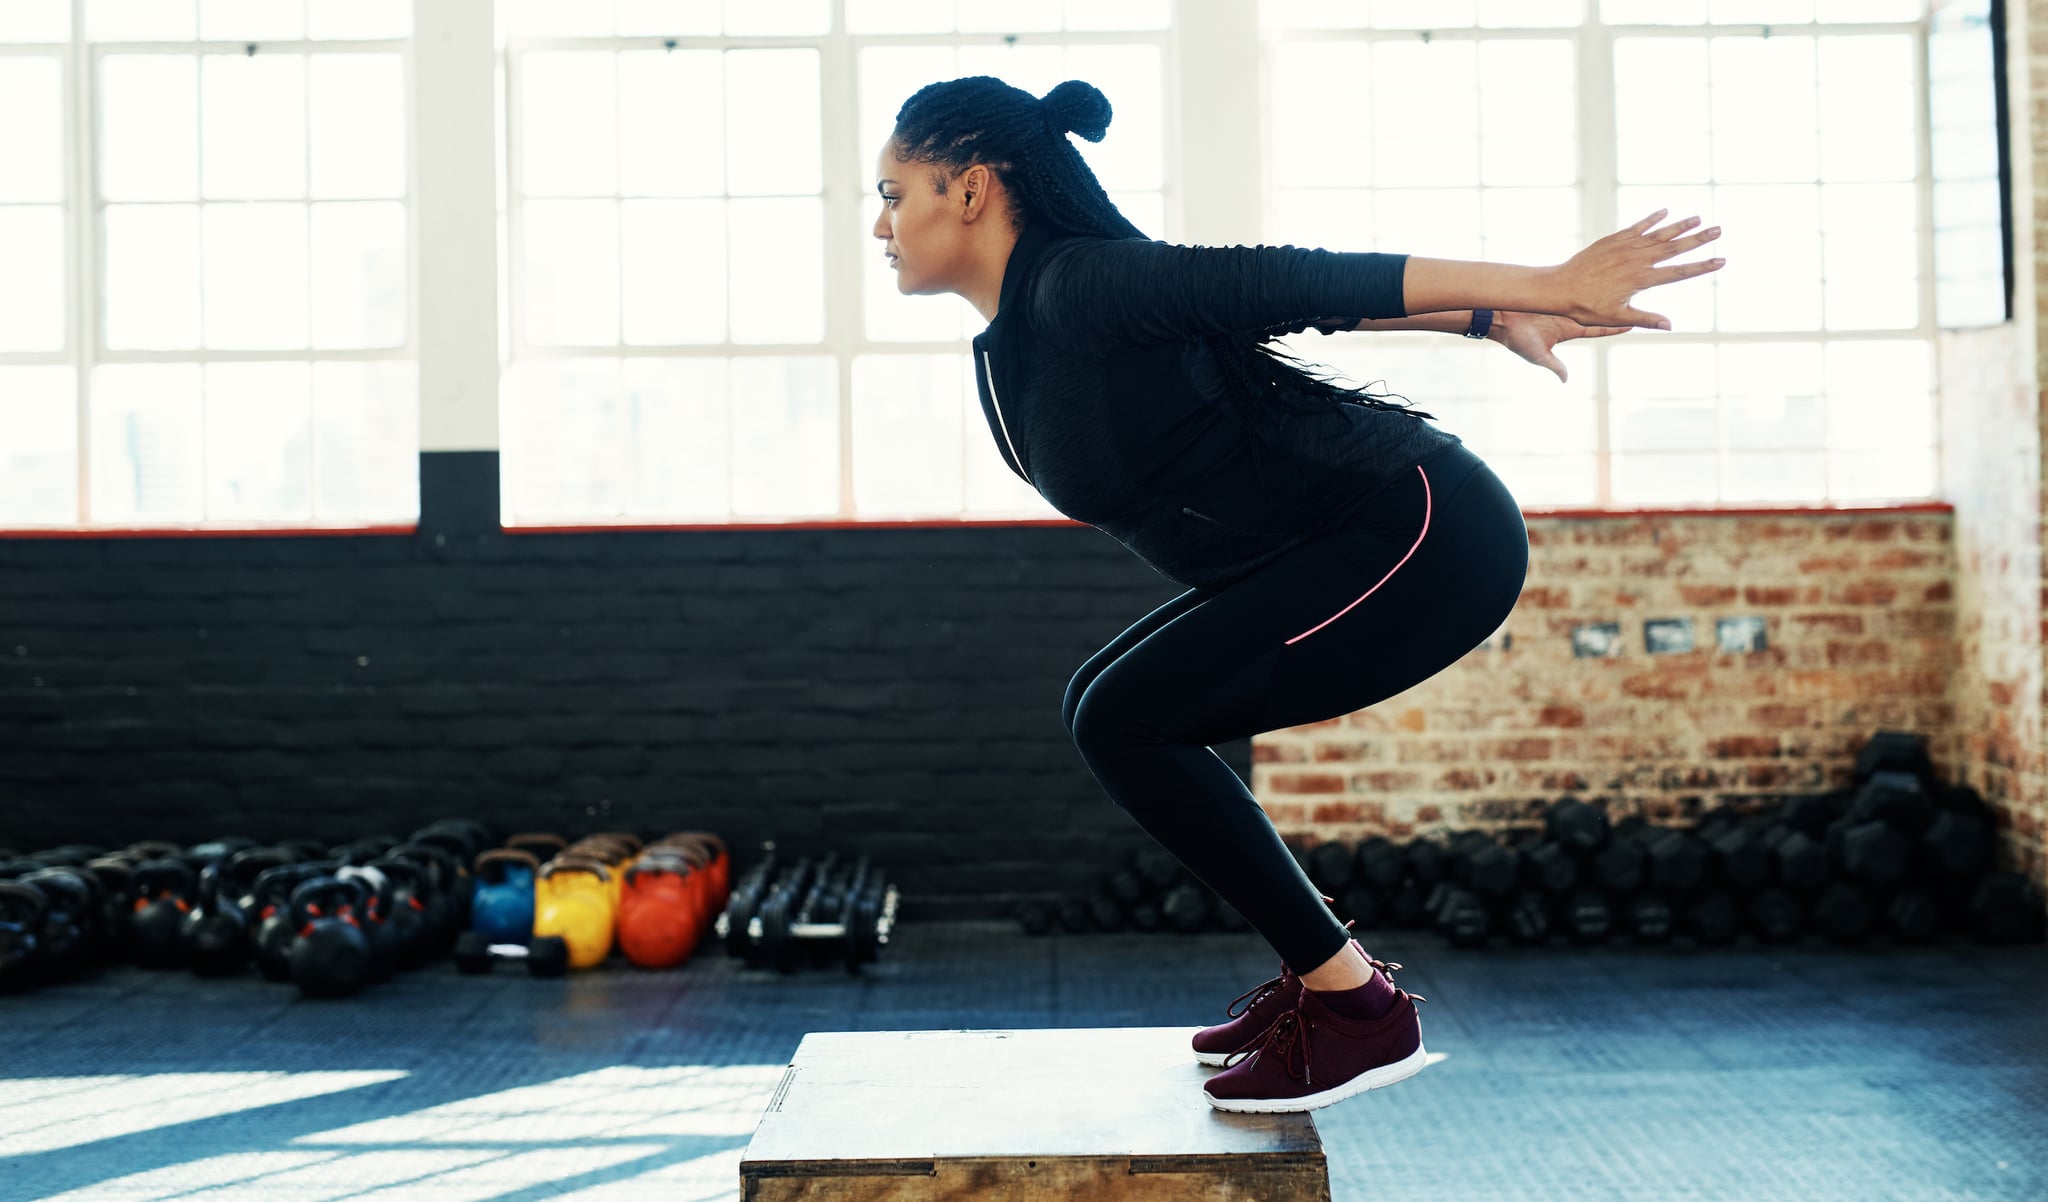 Shot of a young woman doing a exercise jump on a wooden block in a gym